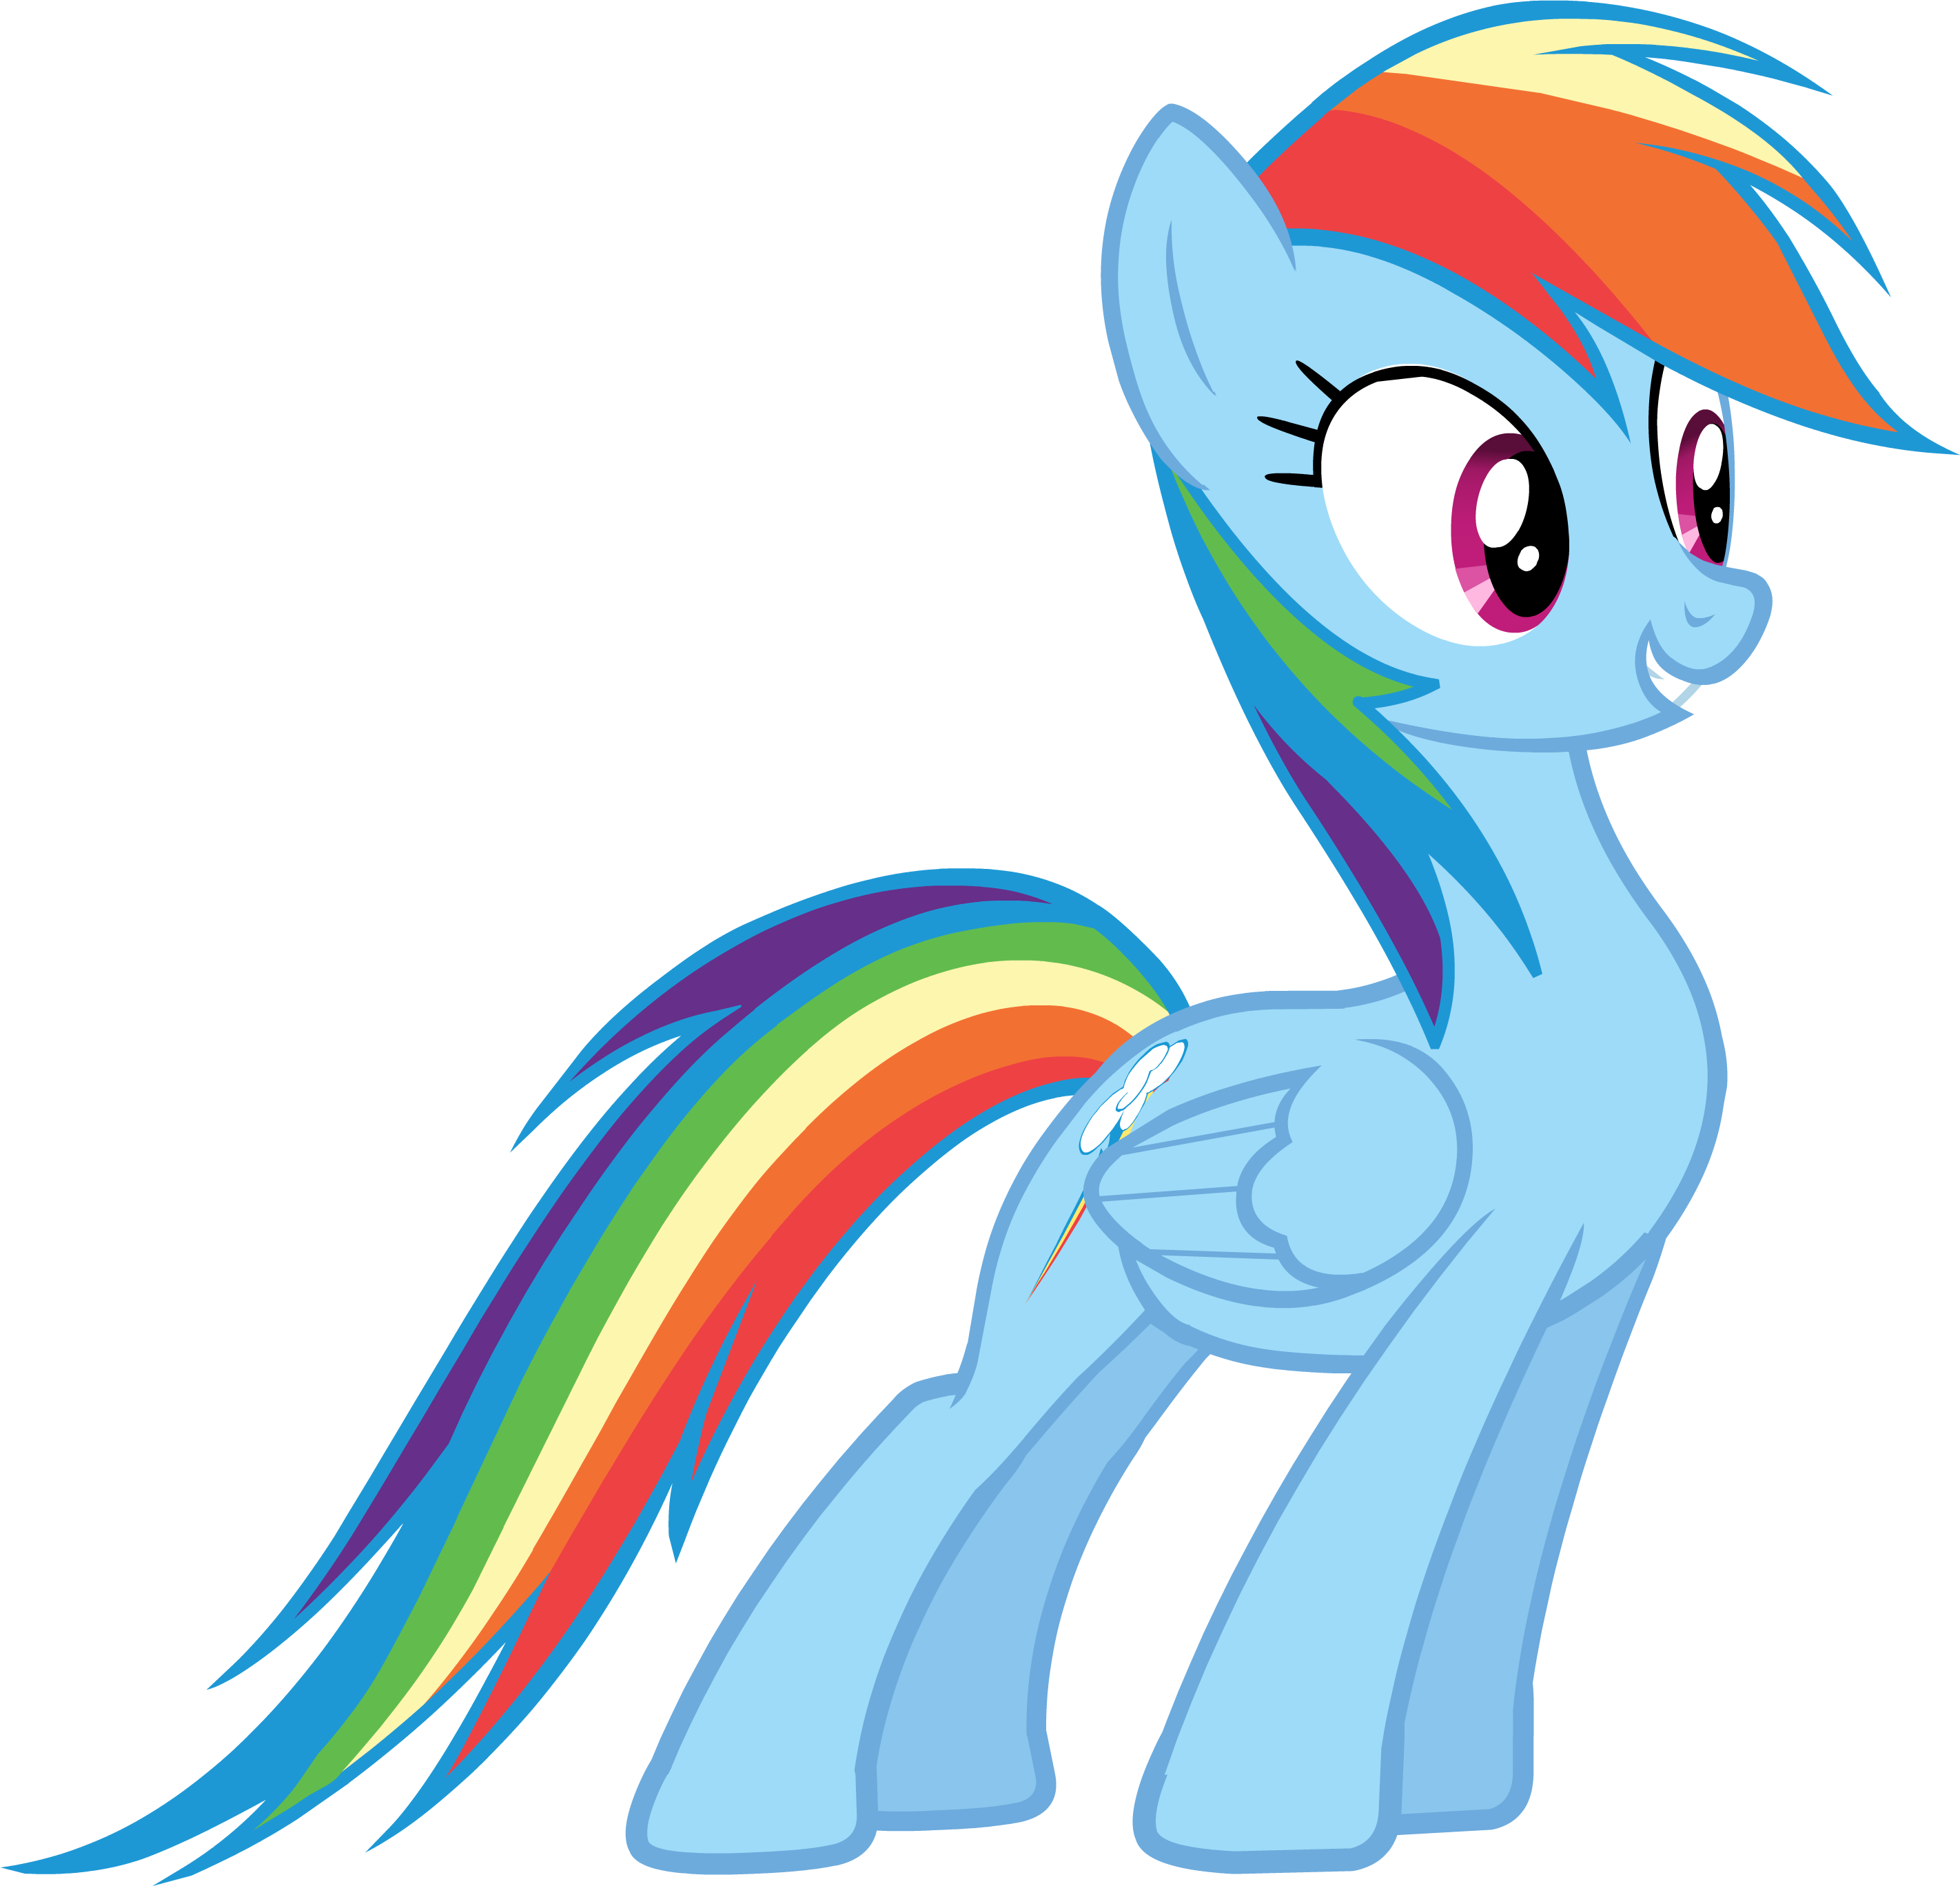 What Mlp Stuff Did You All Get This Holiday Season Page 2 Sugarcube Corner Mlp Forums - roblox my little pony roleplay sugarcube corner mlp forums